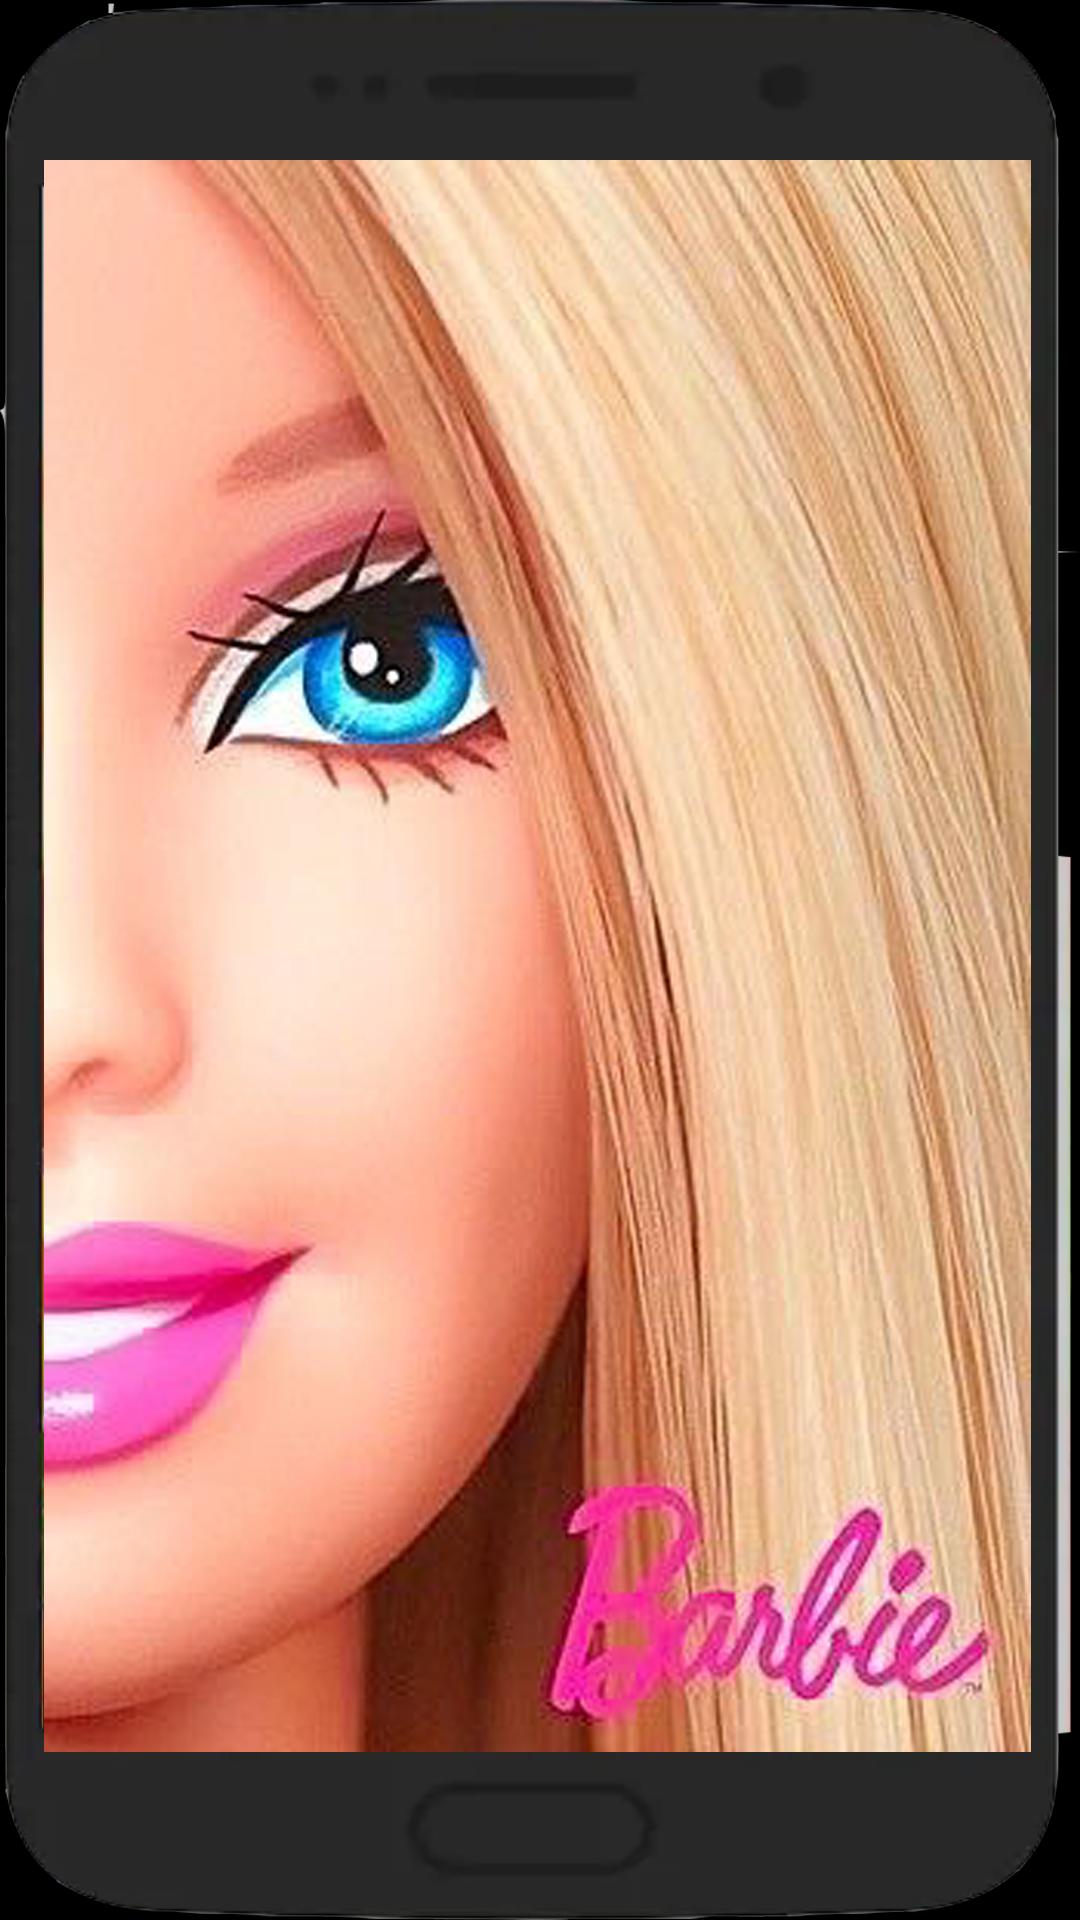 barbie wallpaper for phone for Android